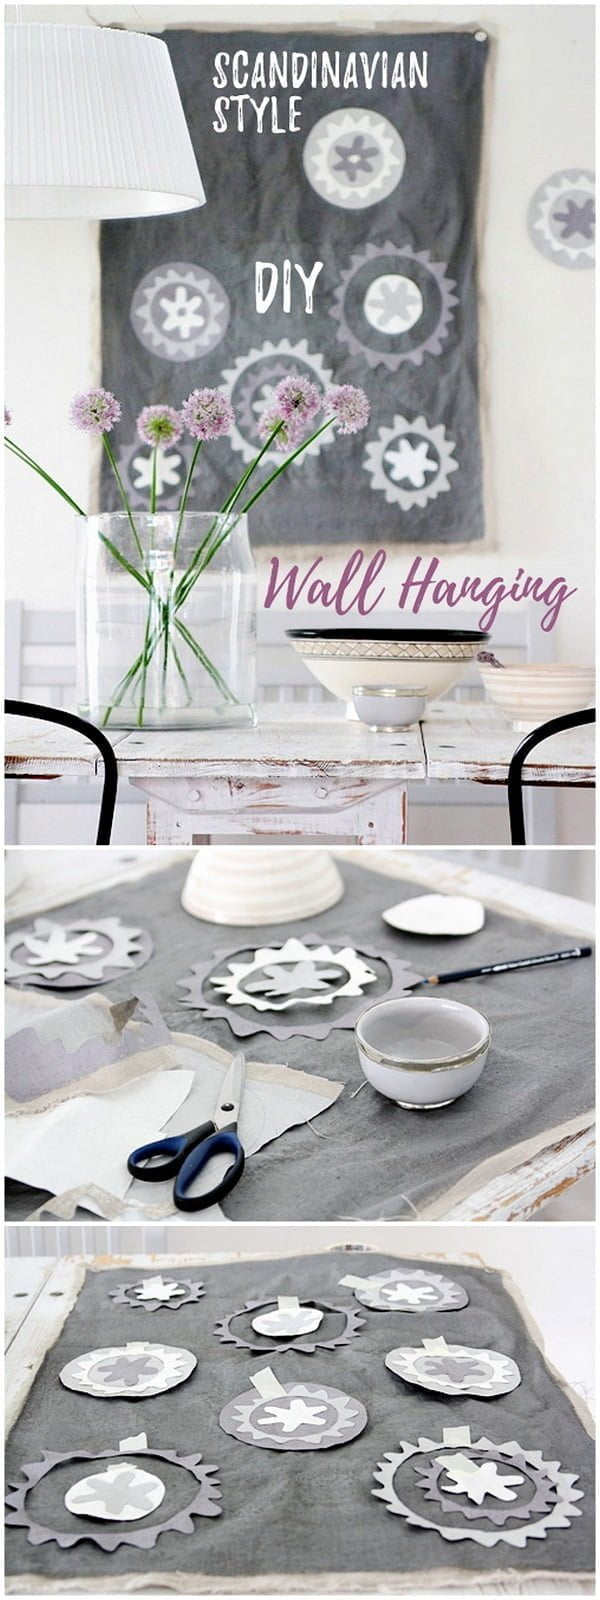 How to make a   style wall hanging    